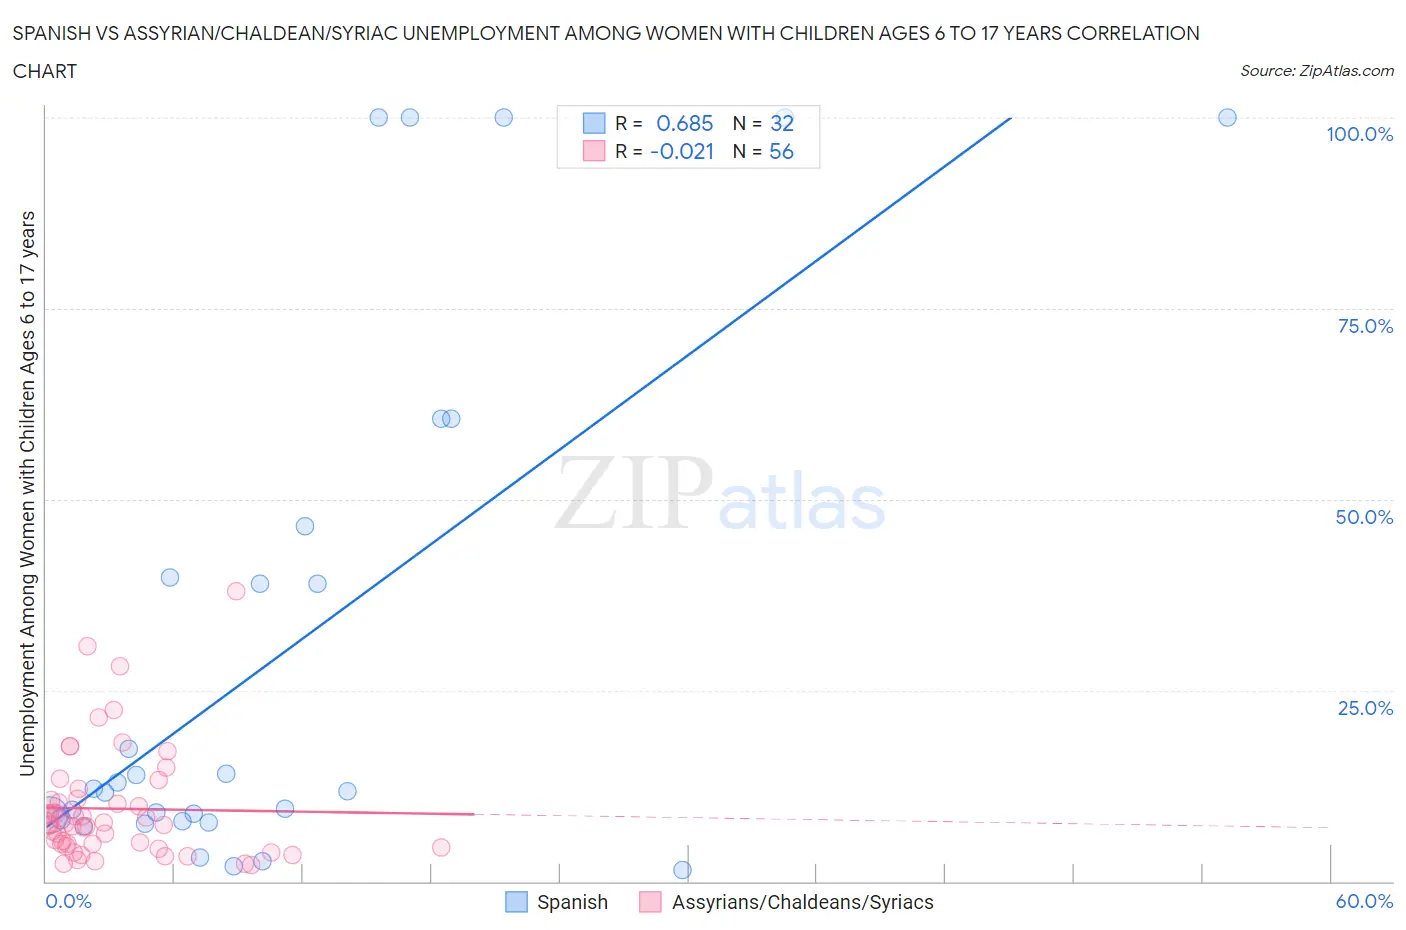 Spanish vs Assyrian/Chaldean/Syriac Unemployment Among Women with Children Ages 6 to 17 years